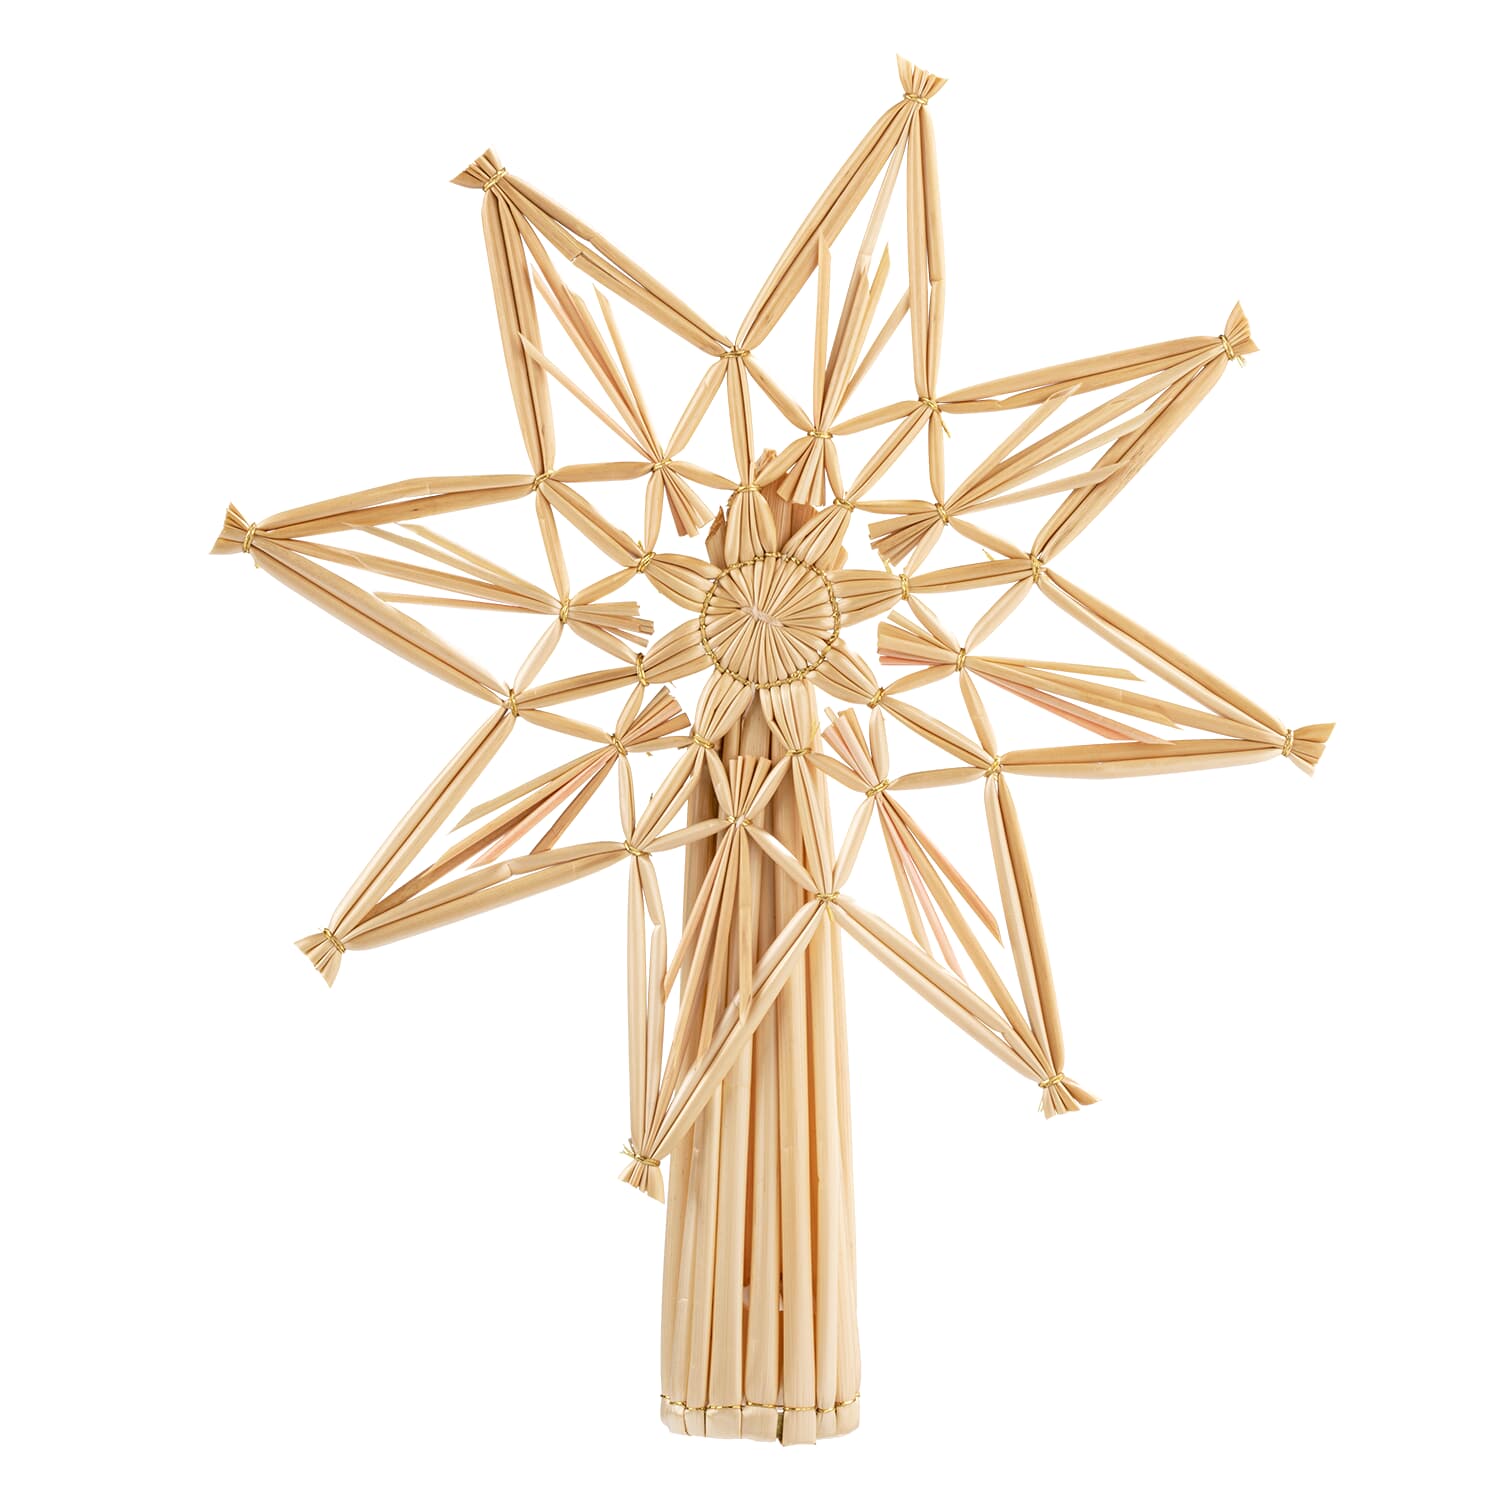 Tree Topper made of straw